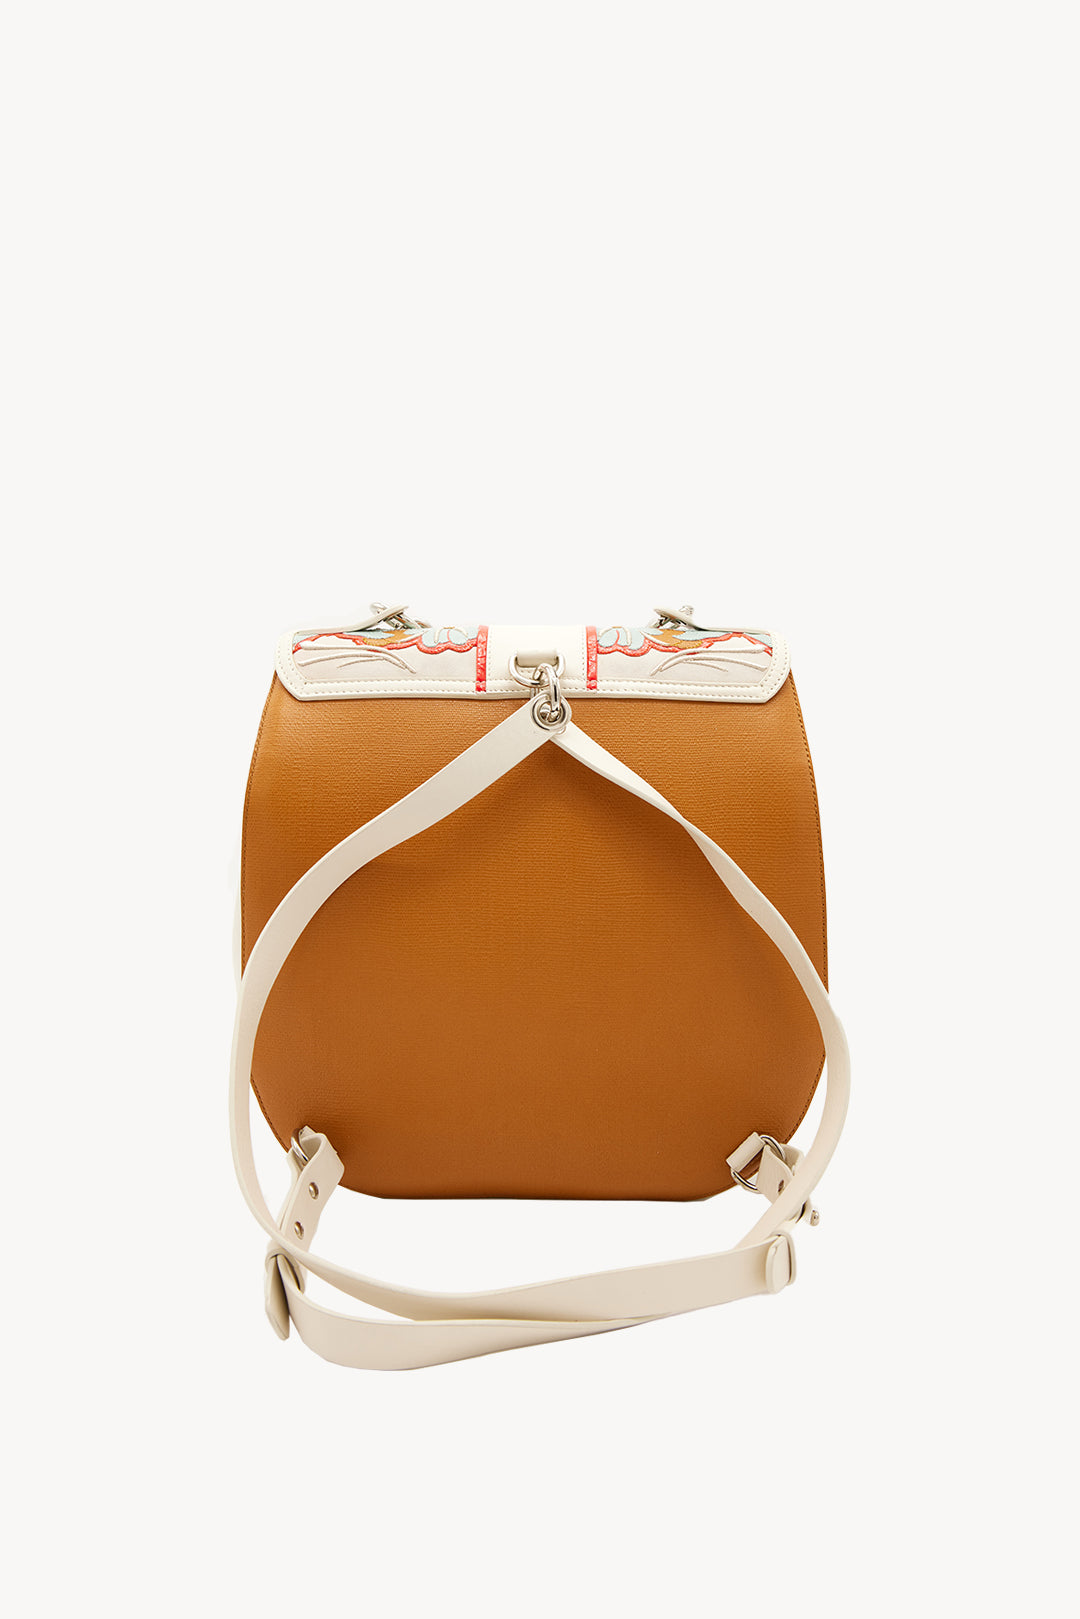 Backpack - Tan and White